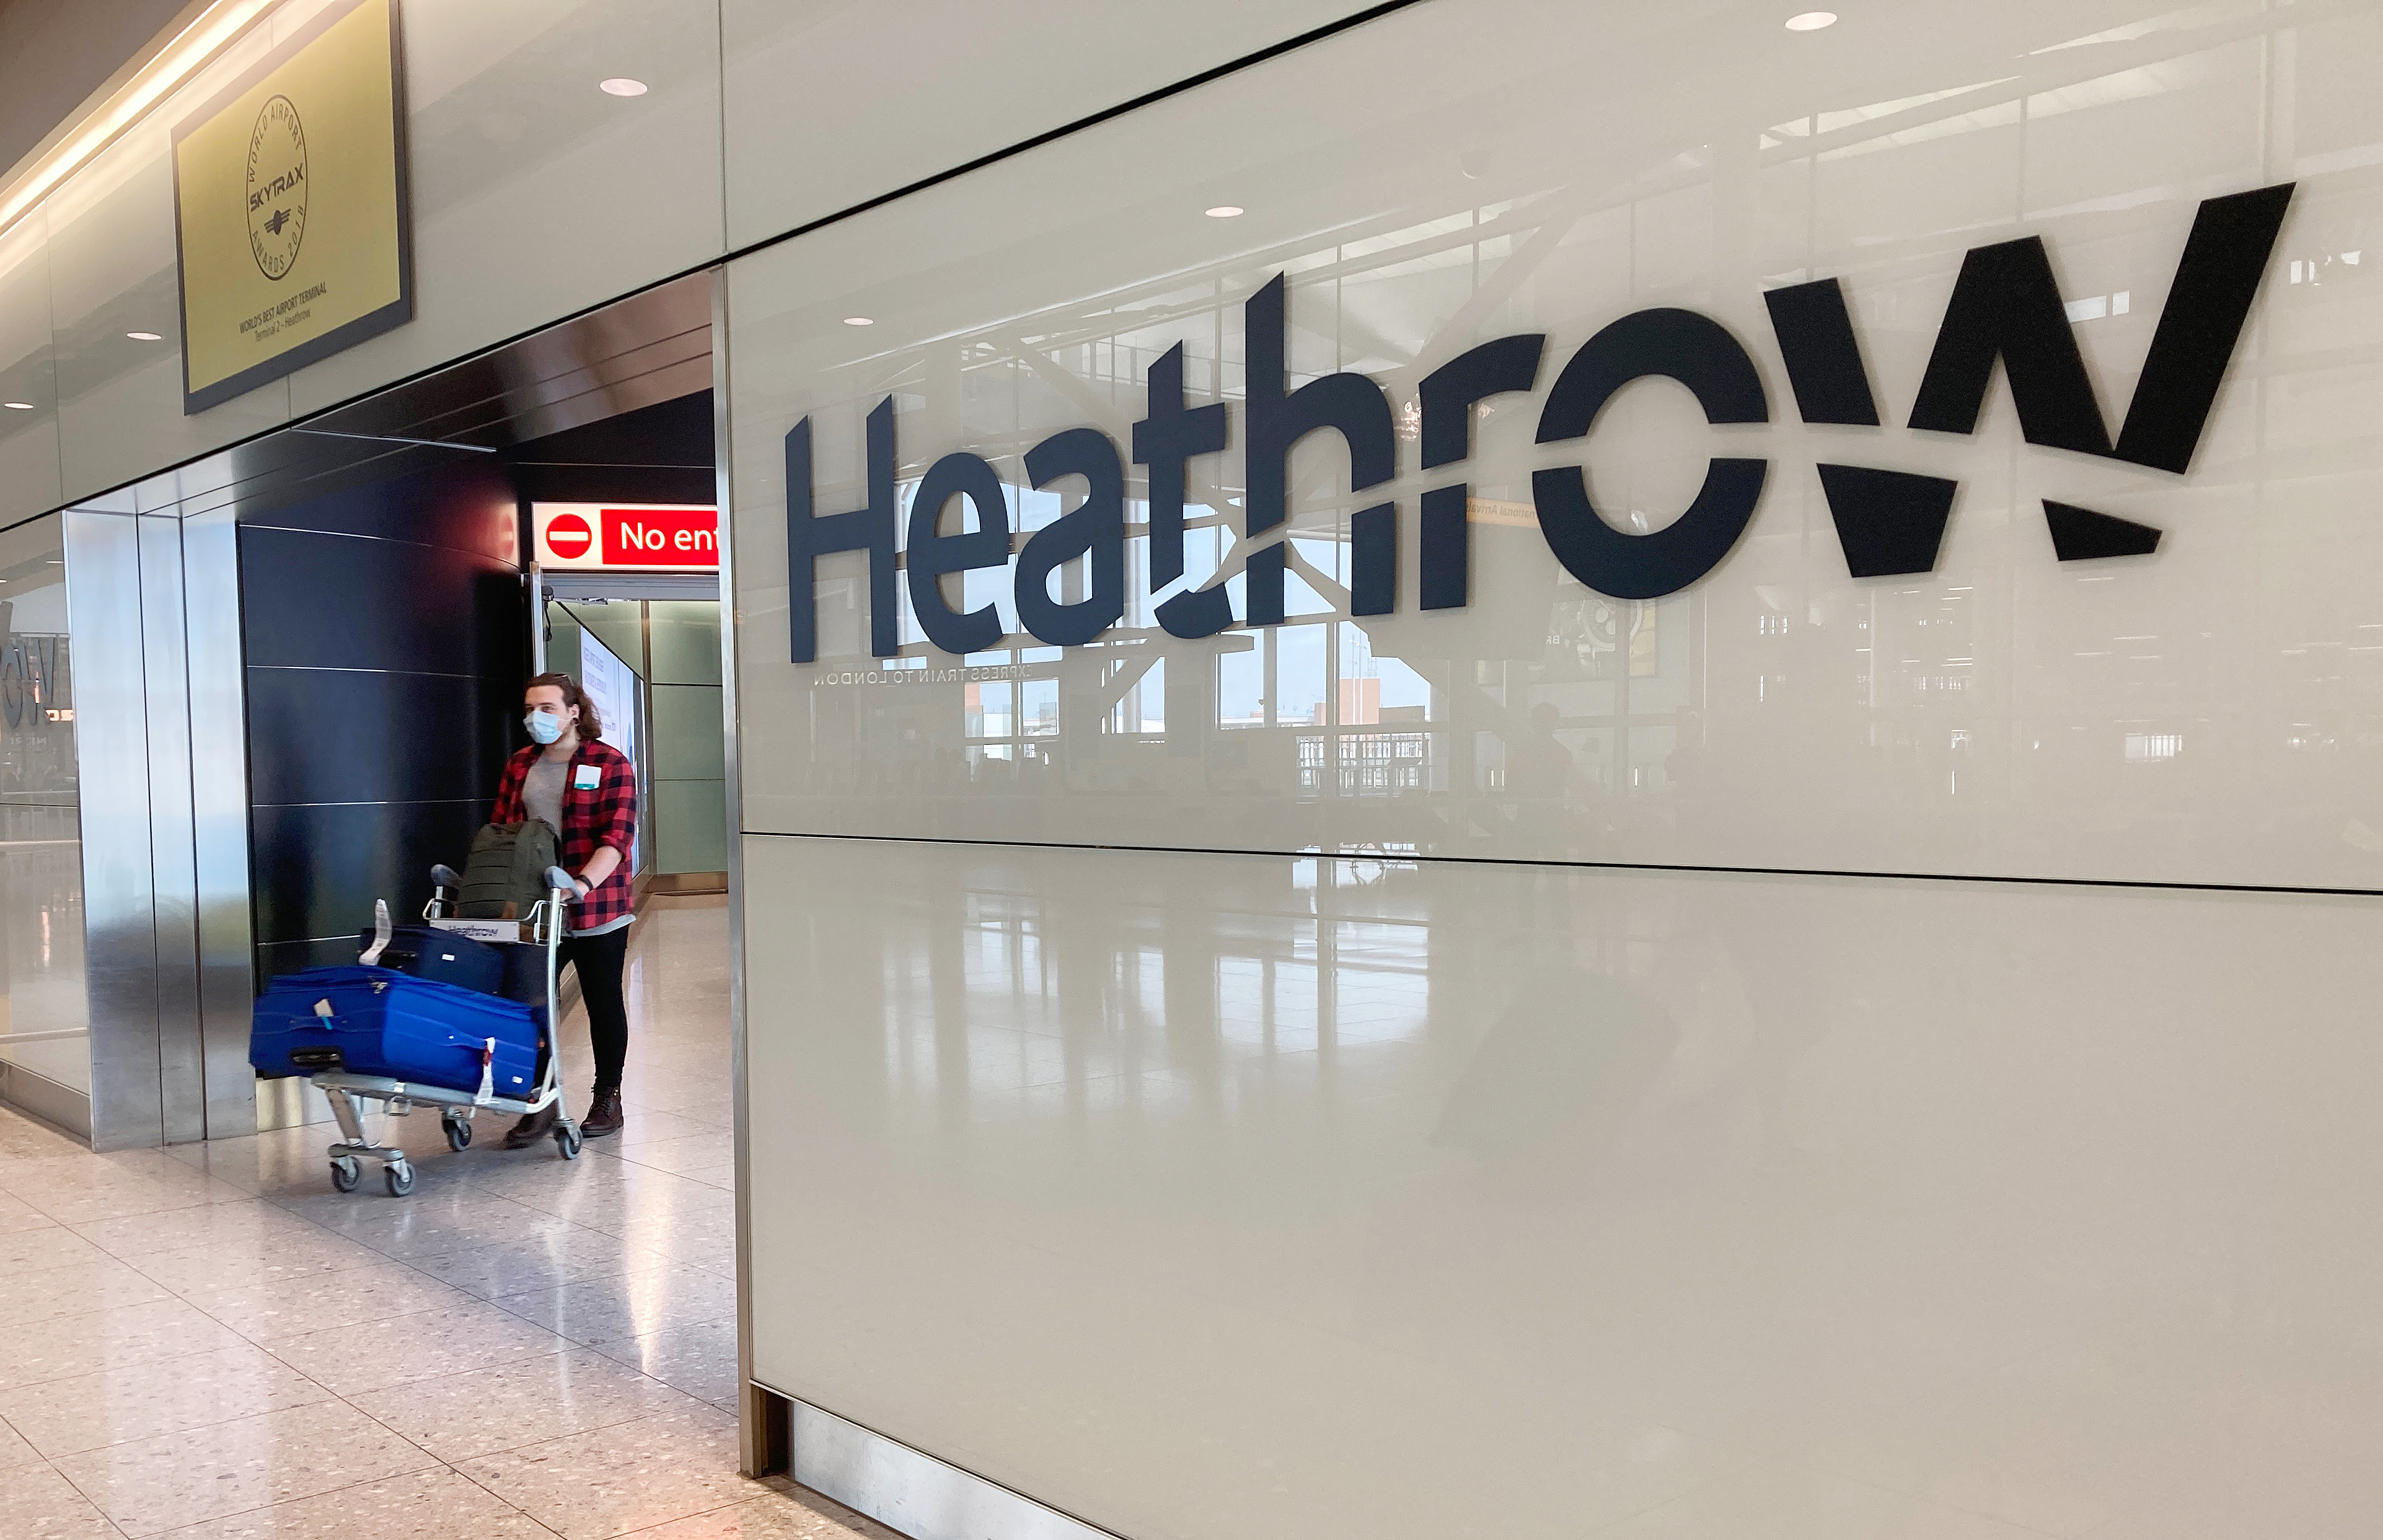 Jobs at risk as Heathrow begins consulting with unions over pay cuts | London